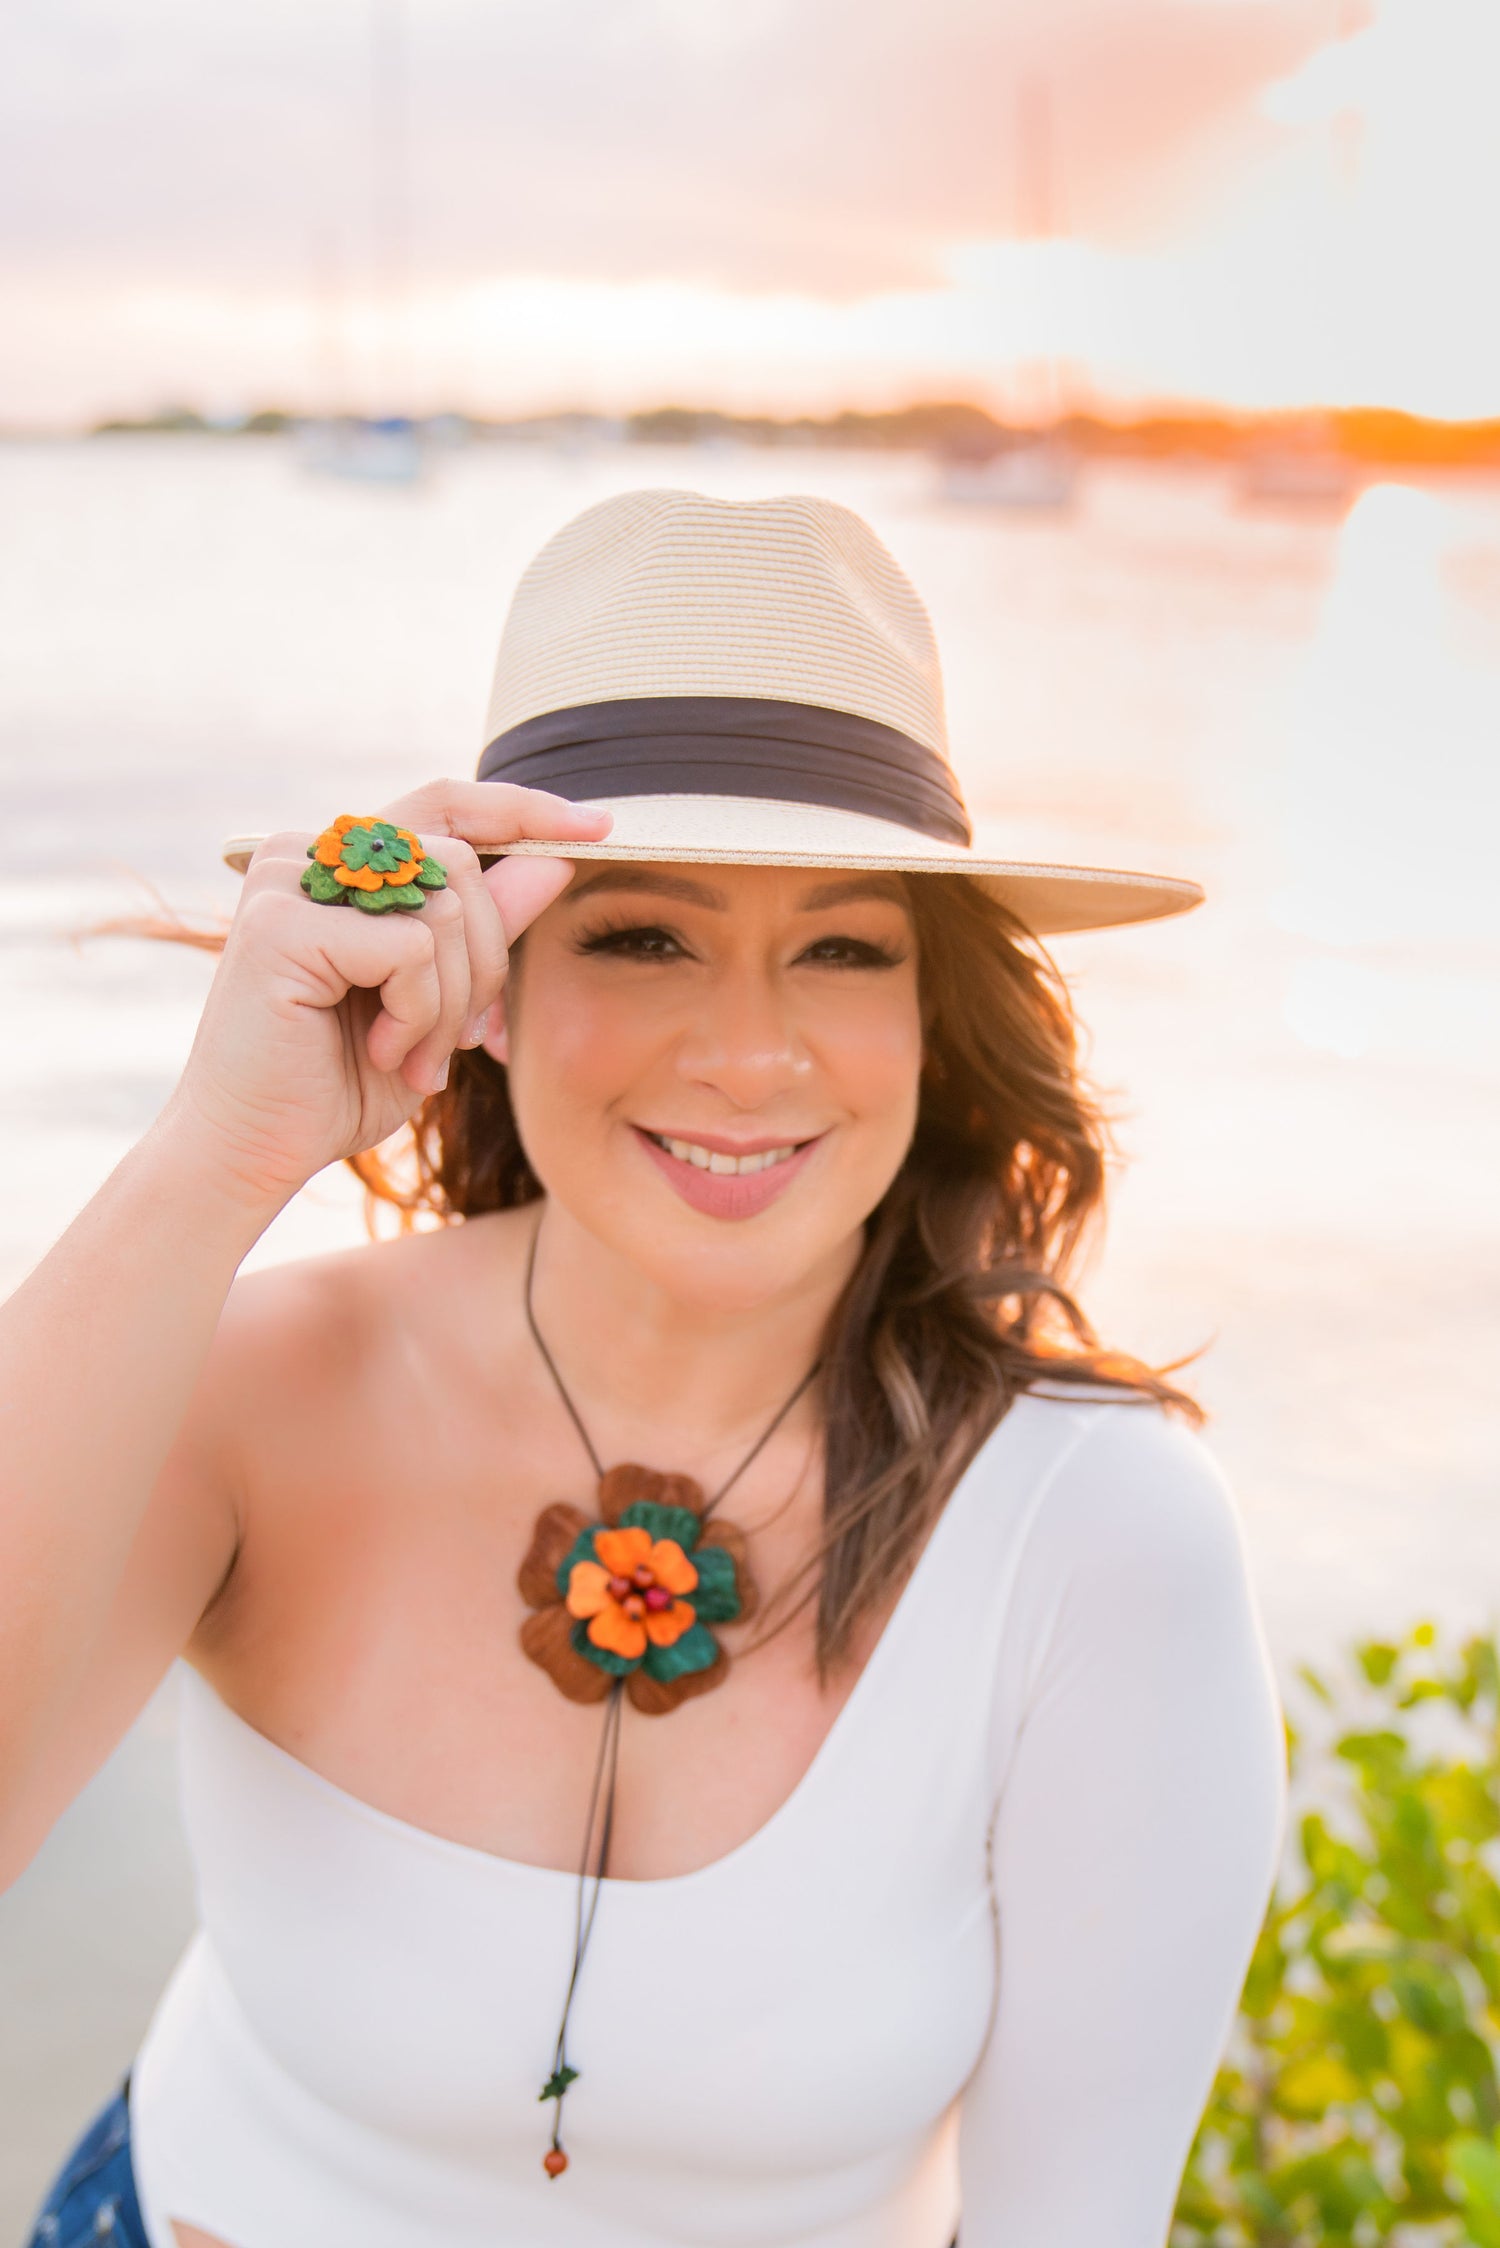 I am an outgoing and passionate person who strongly believes in the power of handmade nature jewelry, and sustainable and ethical fashion. I love to see how jewelry highlights the best of you at the same time it holds your own essence.